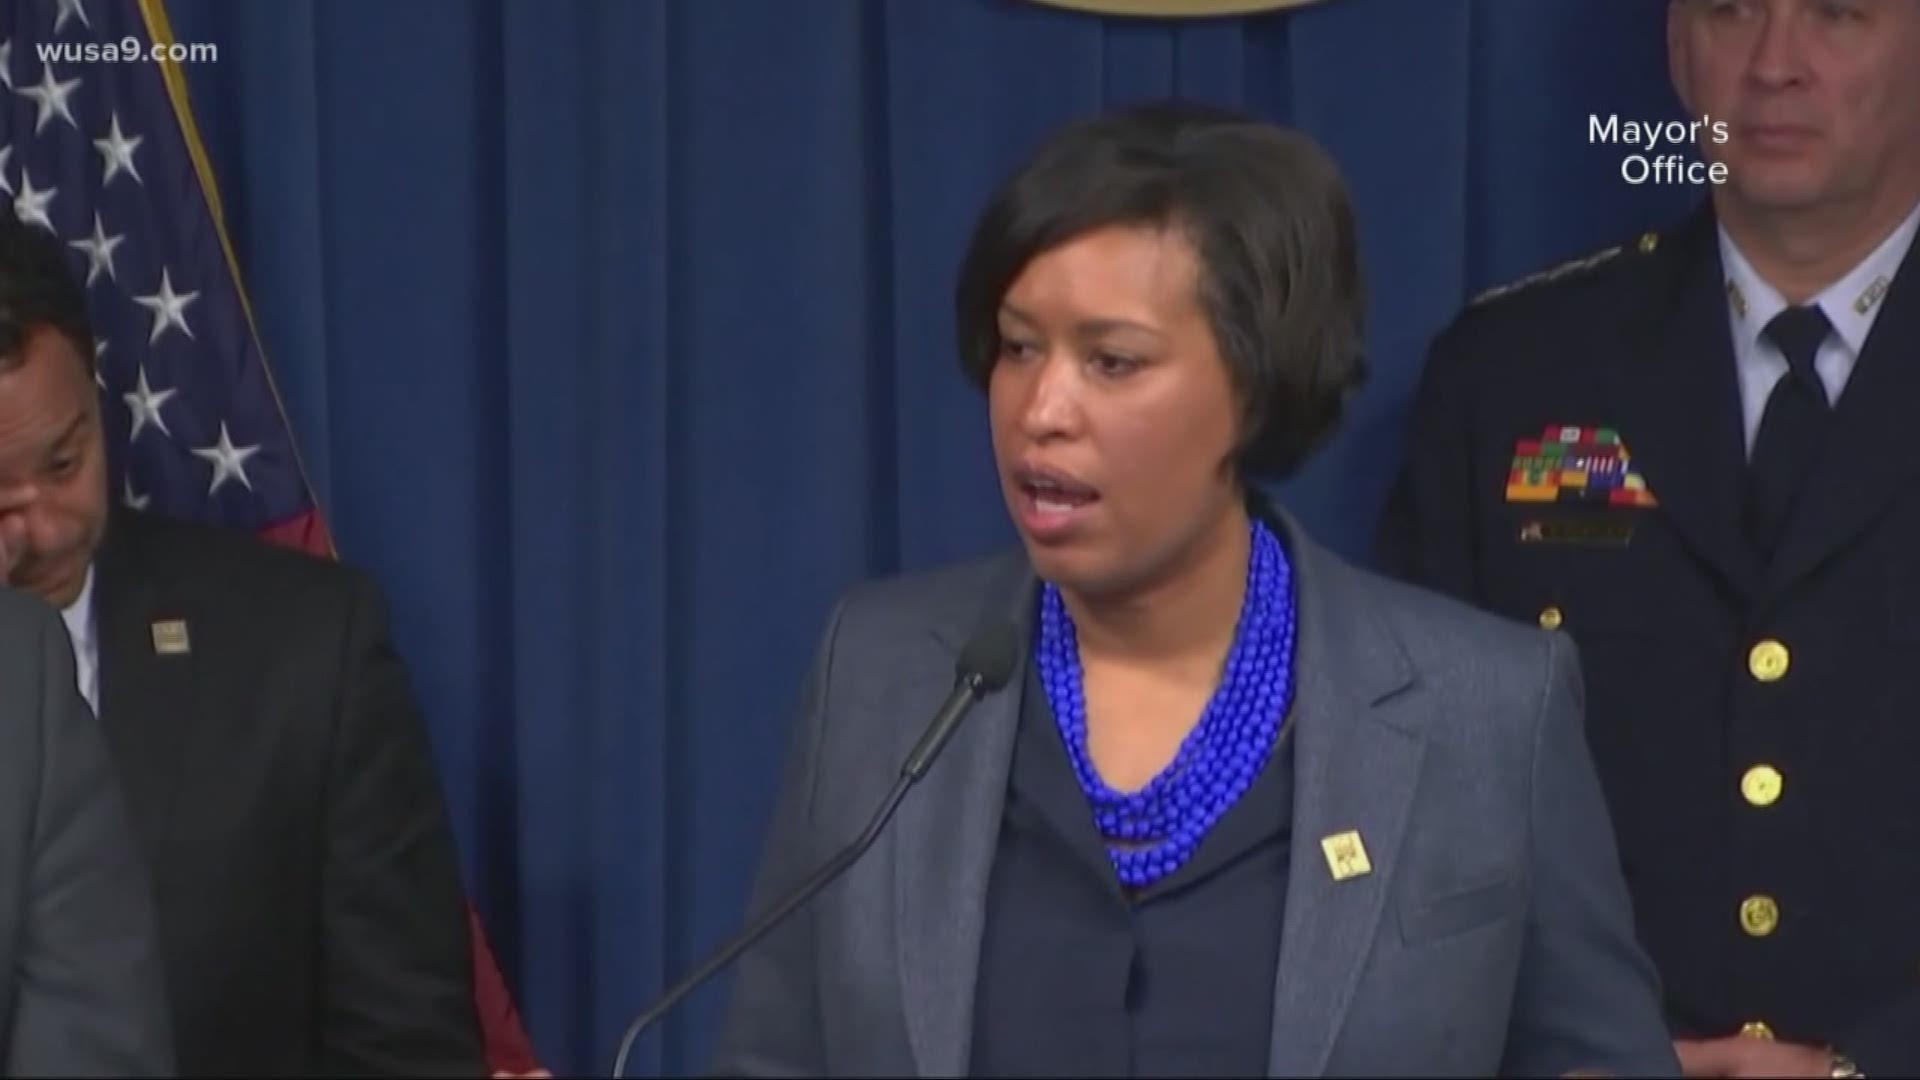 Here’s four things you need to know about Mayor Bowser’s budget plan.